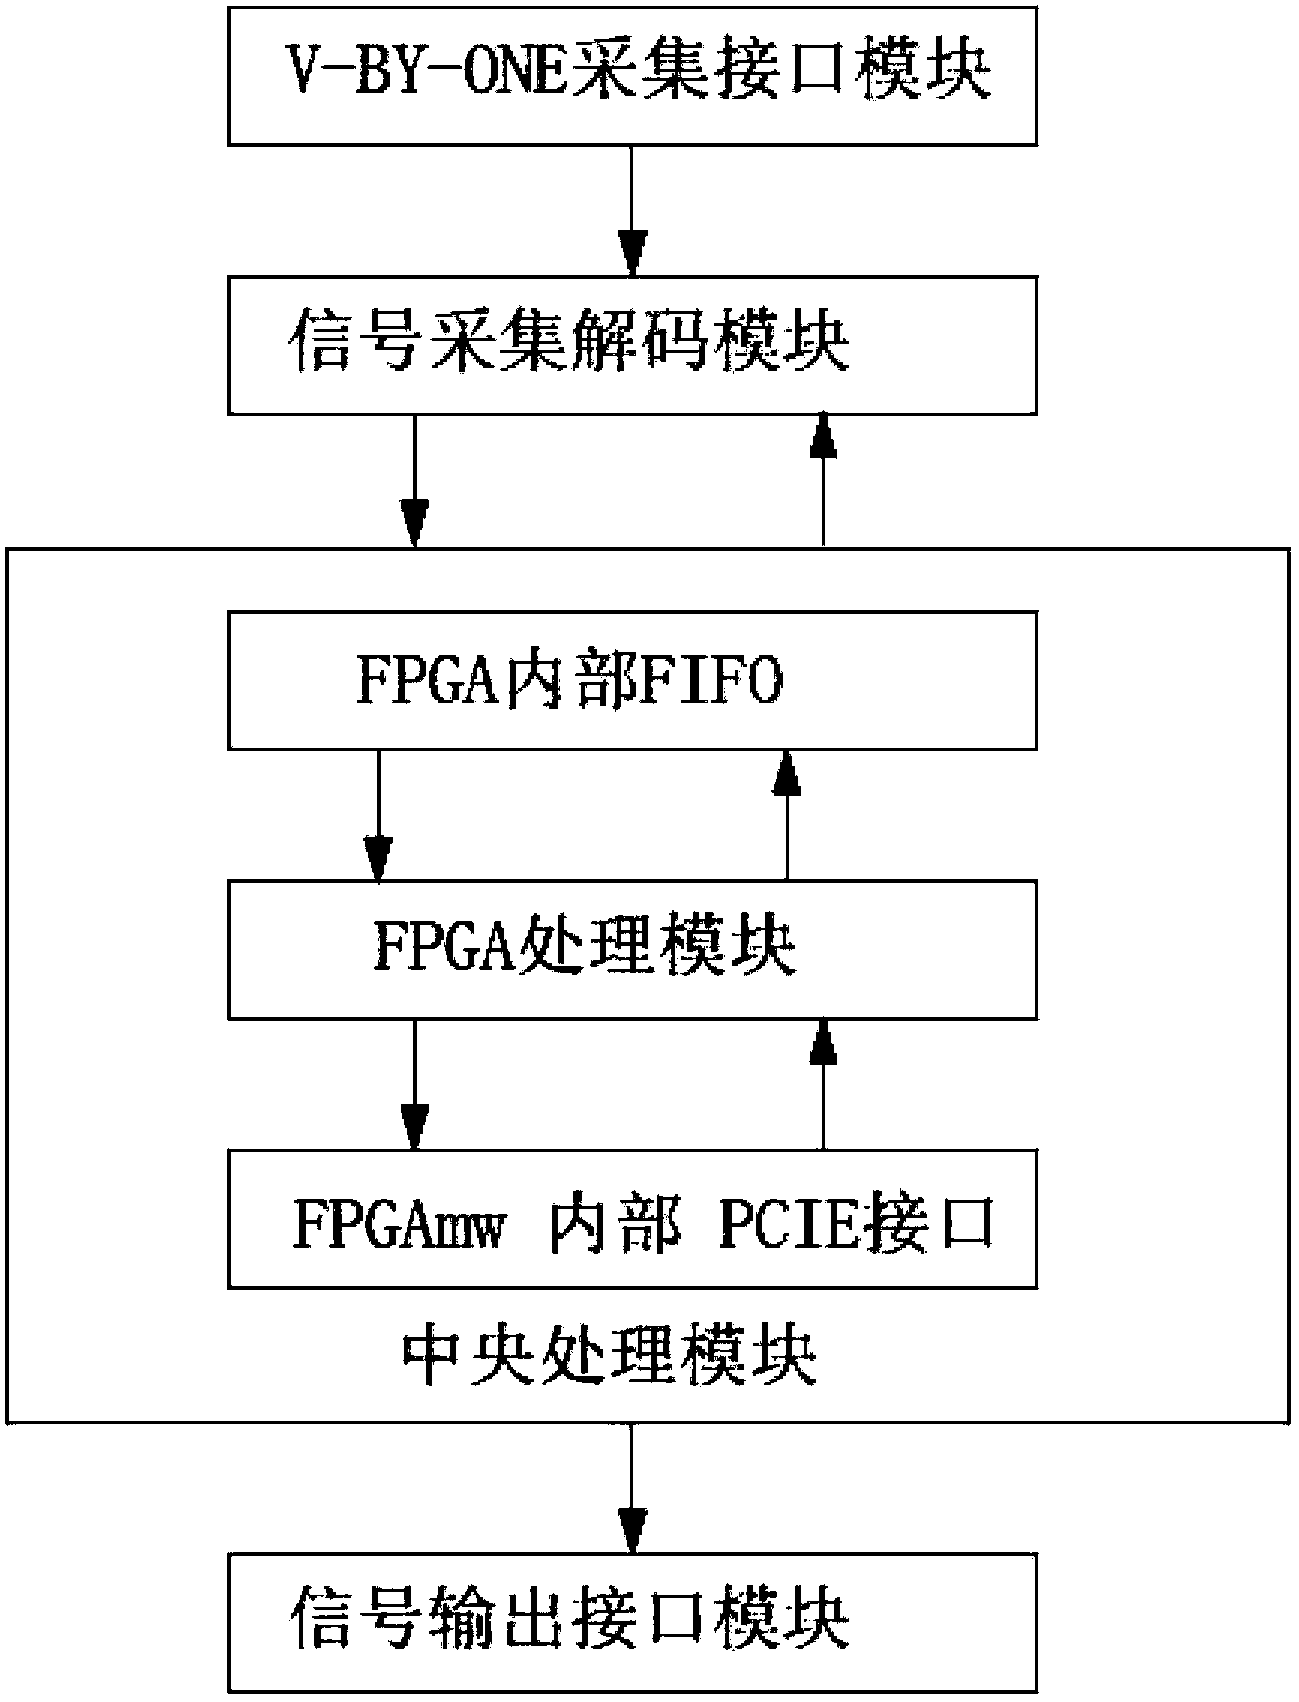 Method and device for automatically detecting 4K2K product main control board